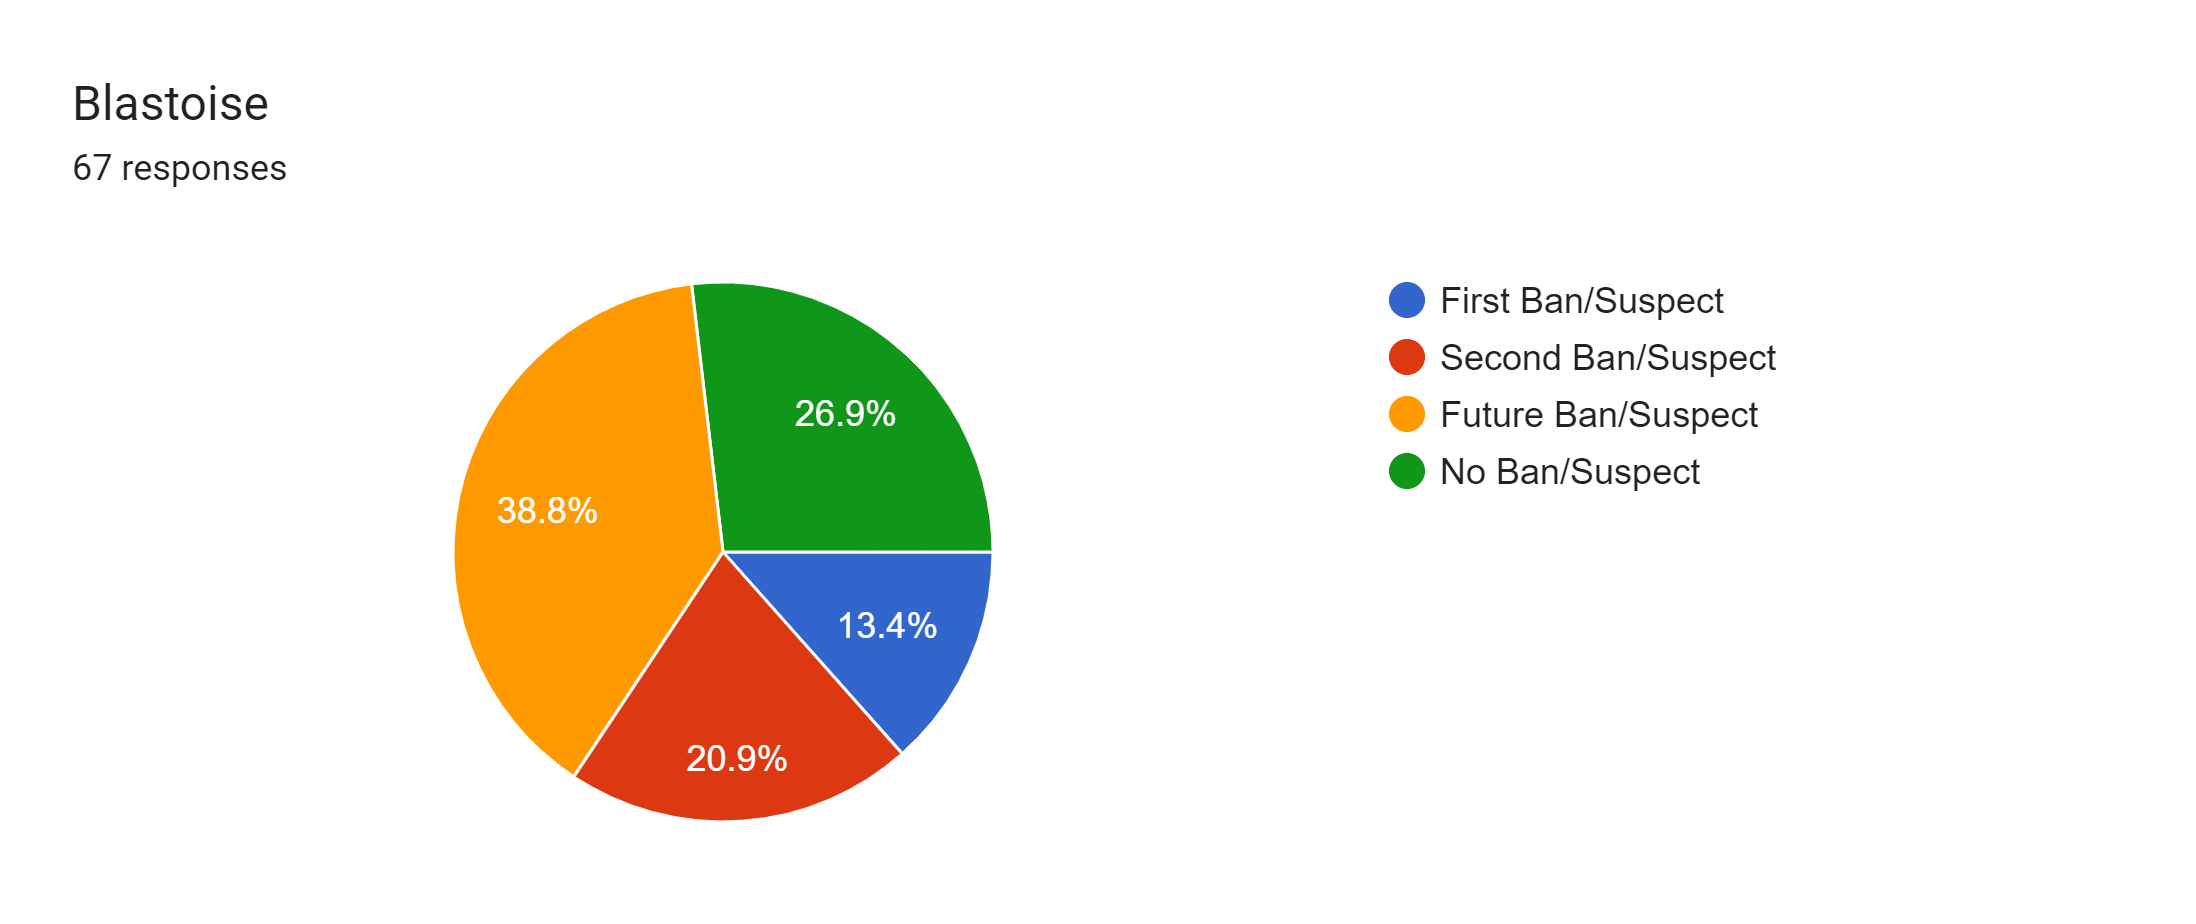 Forms response chart. Question title: Blastoise. Number of responses: 67 responses.